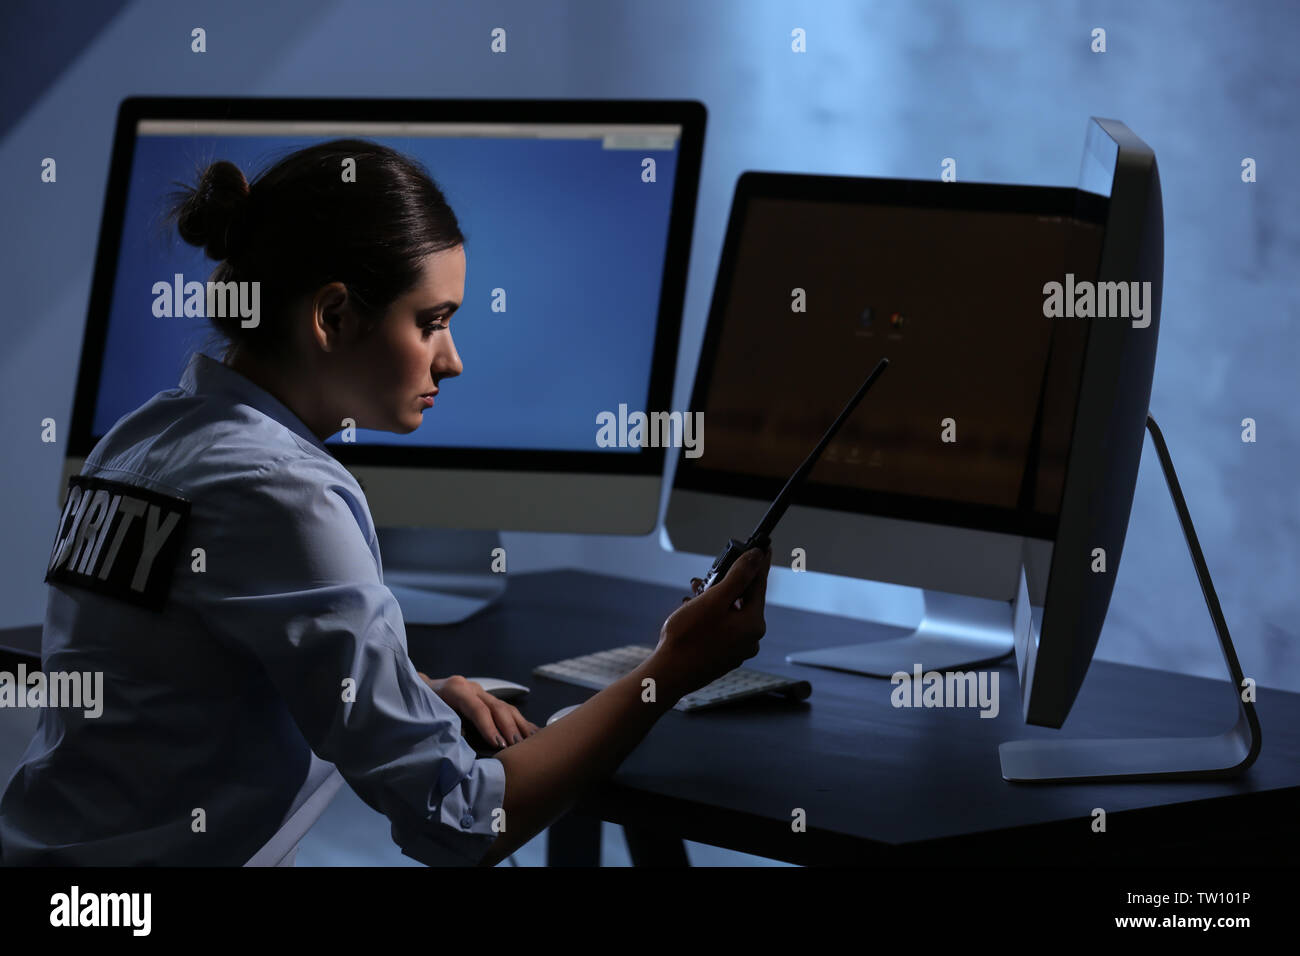 Female Security Guard On Workplace Stock Photo Alamy